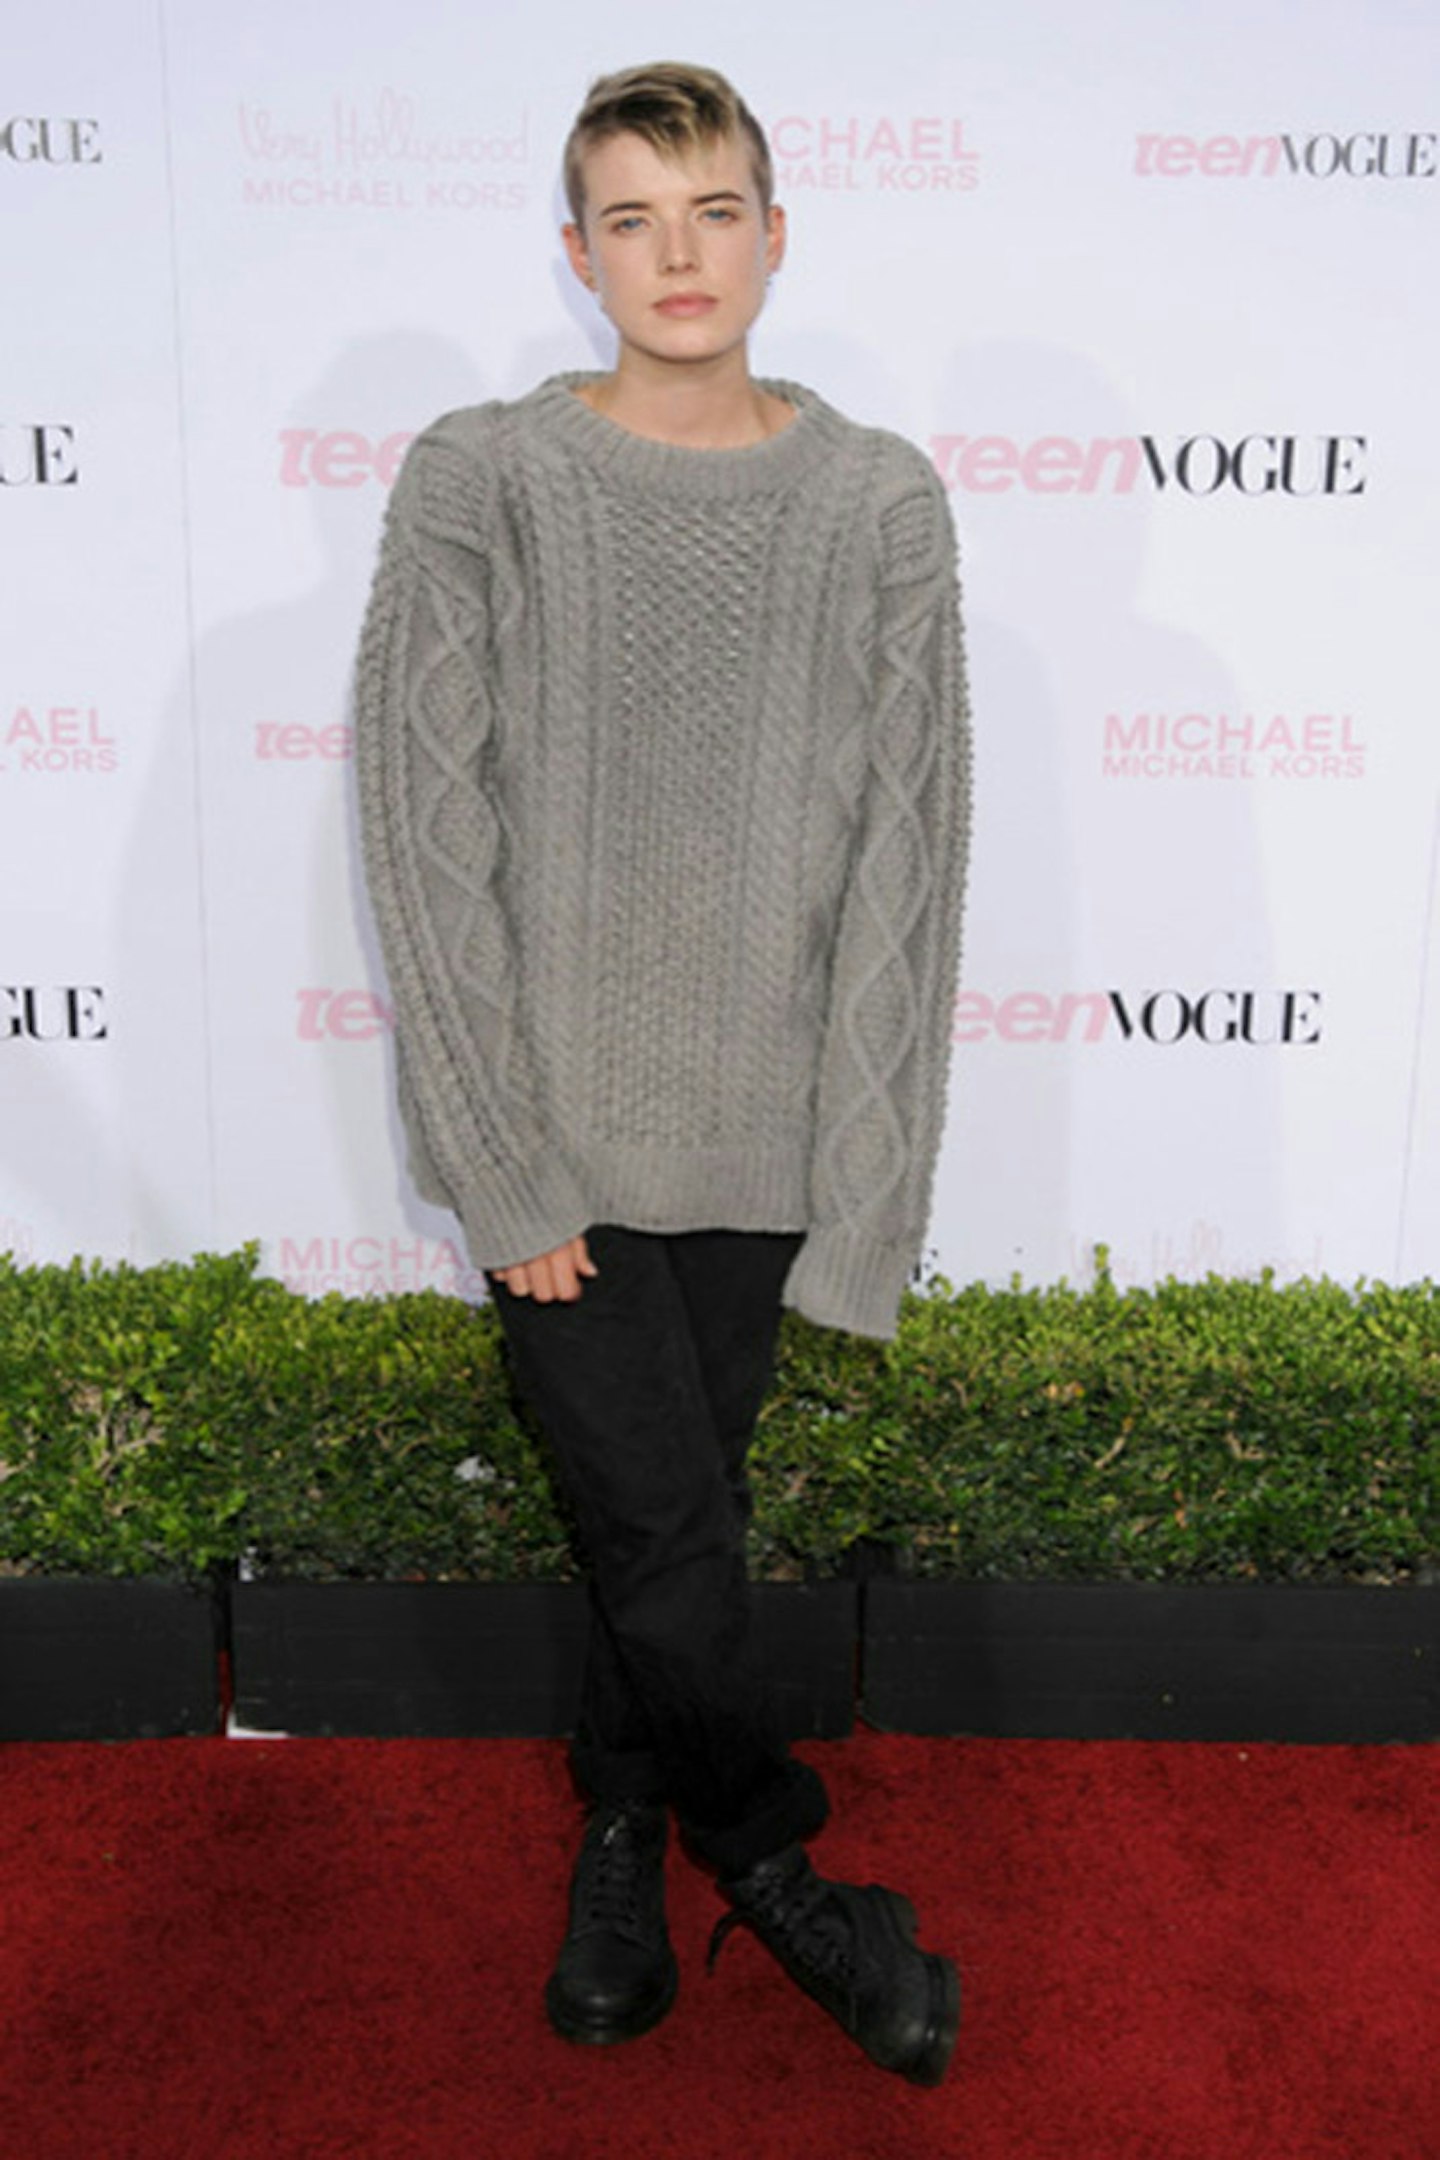 Agyness Deyn at The 8th Annual Teen Vogue Young Hollywood Party, Los Angeles - 1 October 2010